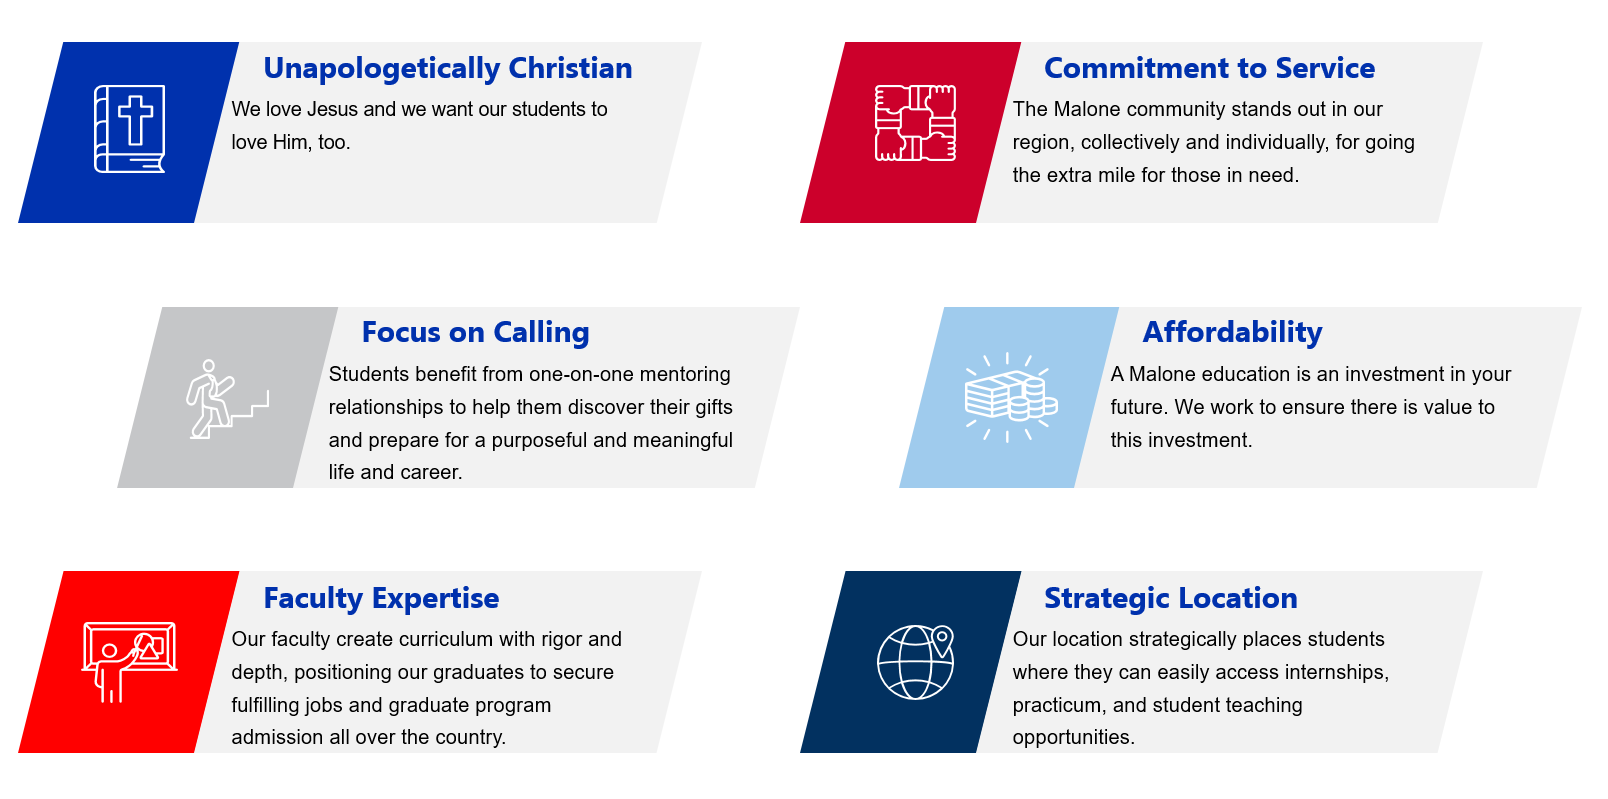 Six content sections, Unapologetically Christian, Commitment to Service, Focus on Calling, Affordability, Faculty Expertise, & Strategic Location